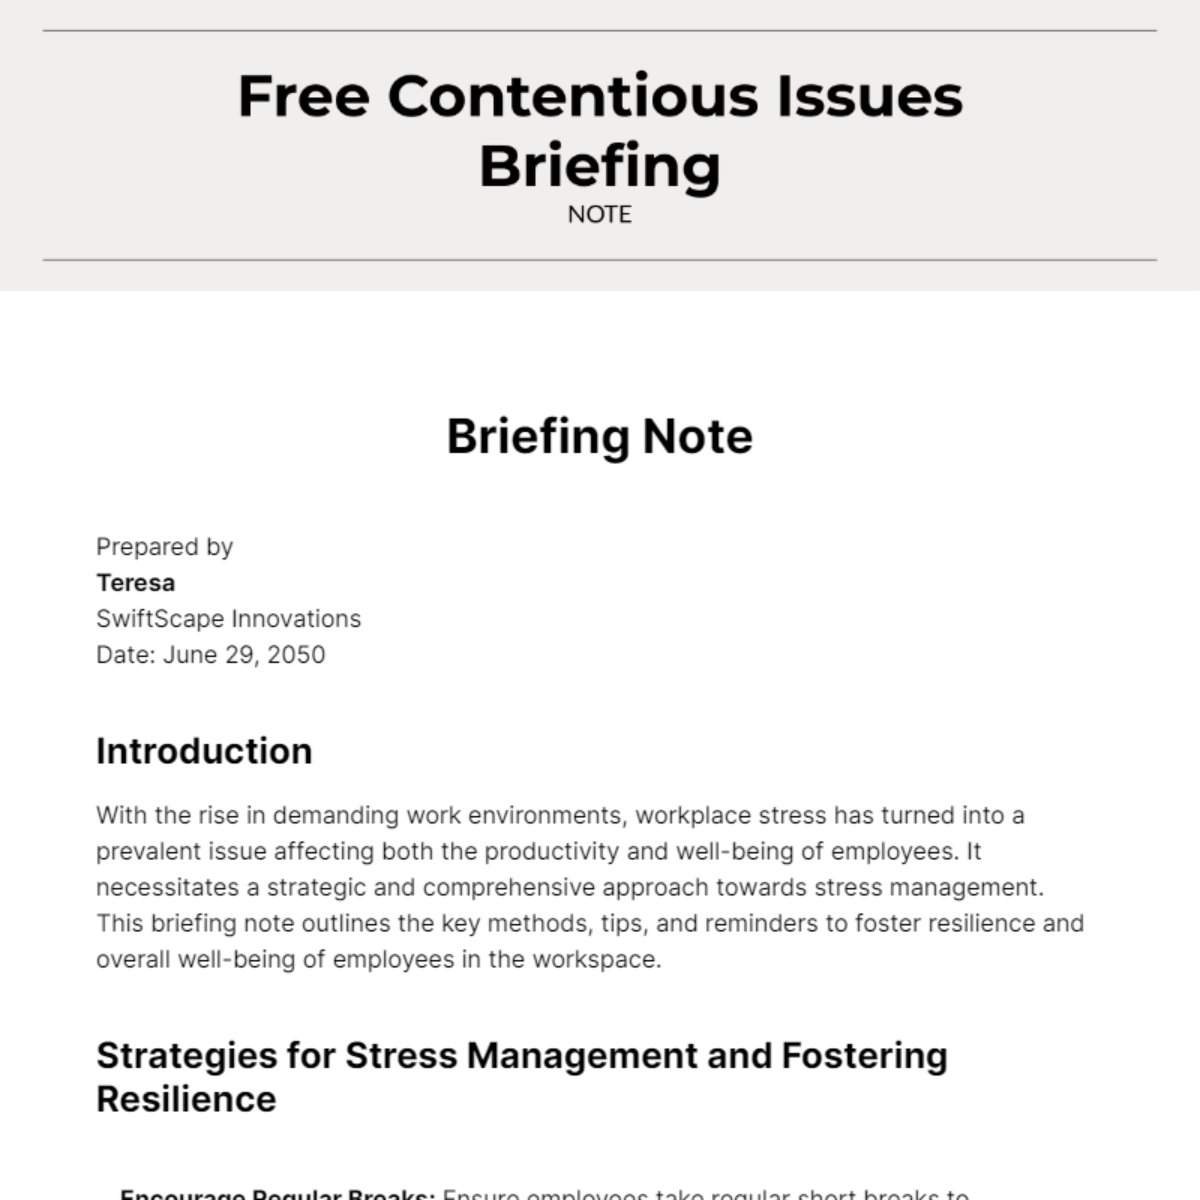 Free Contentious Issues Briefing Note Template